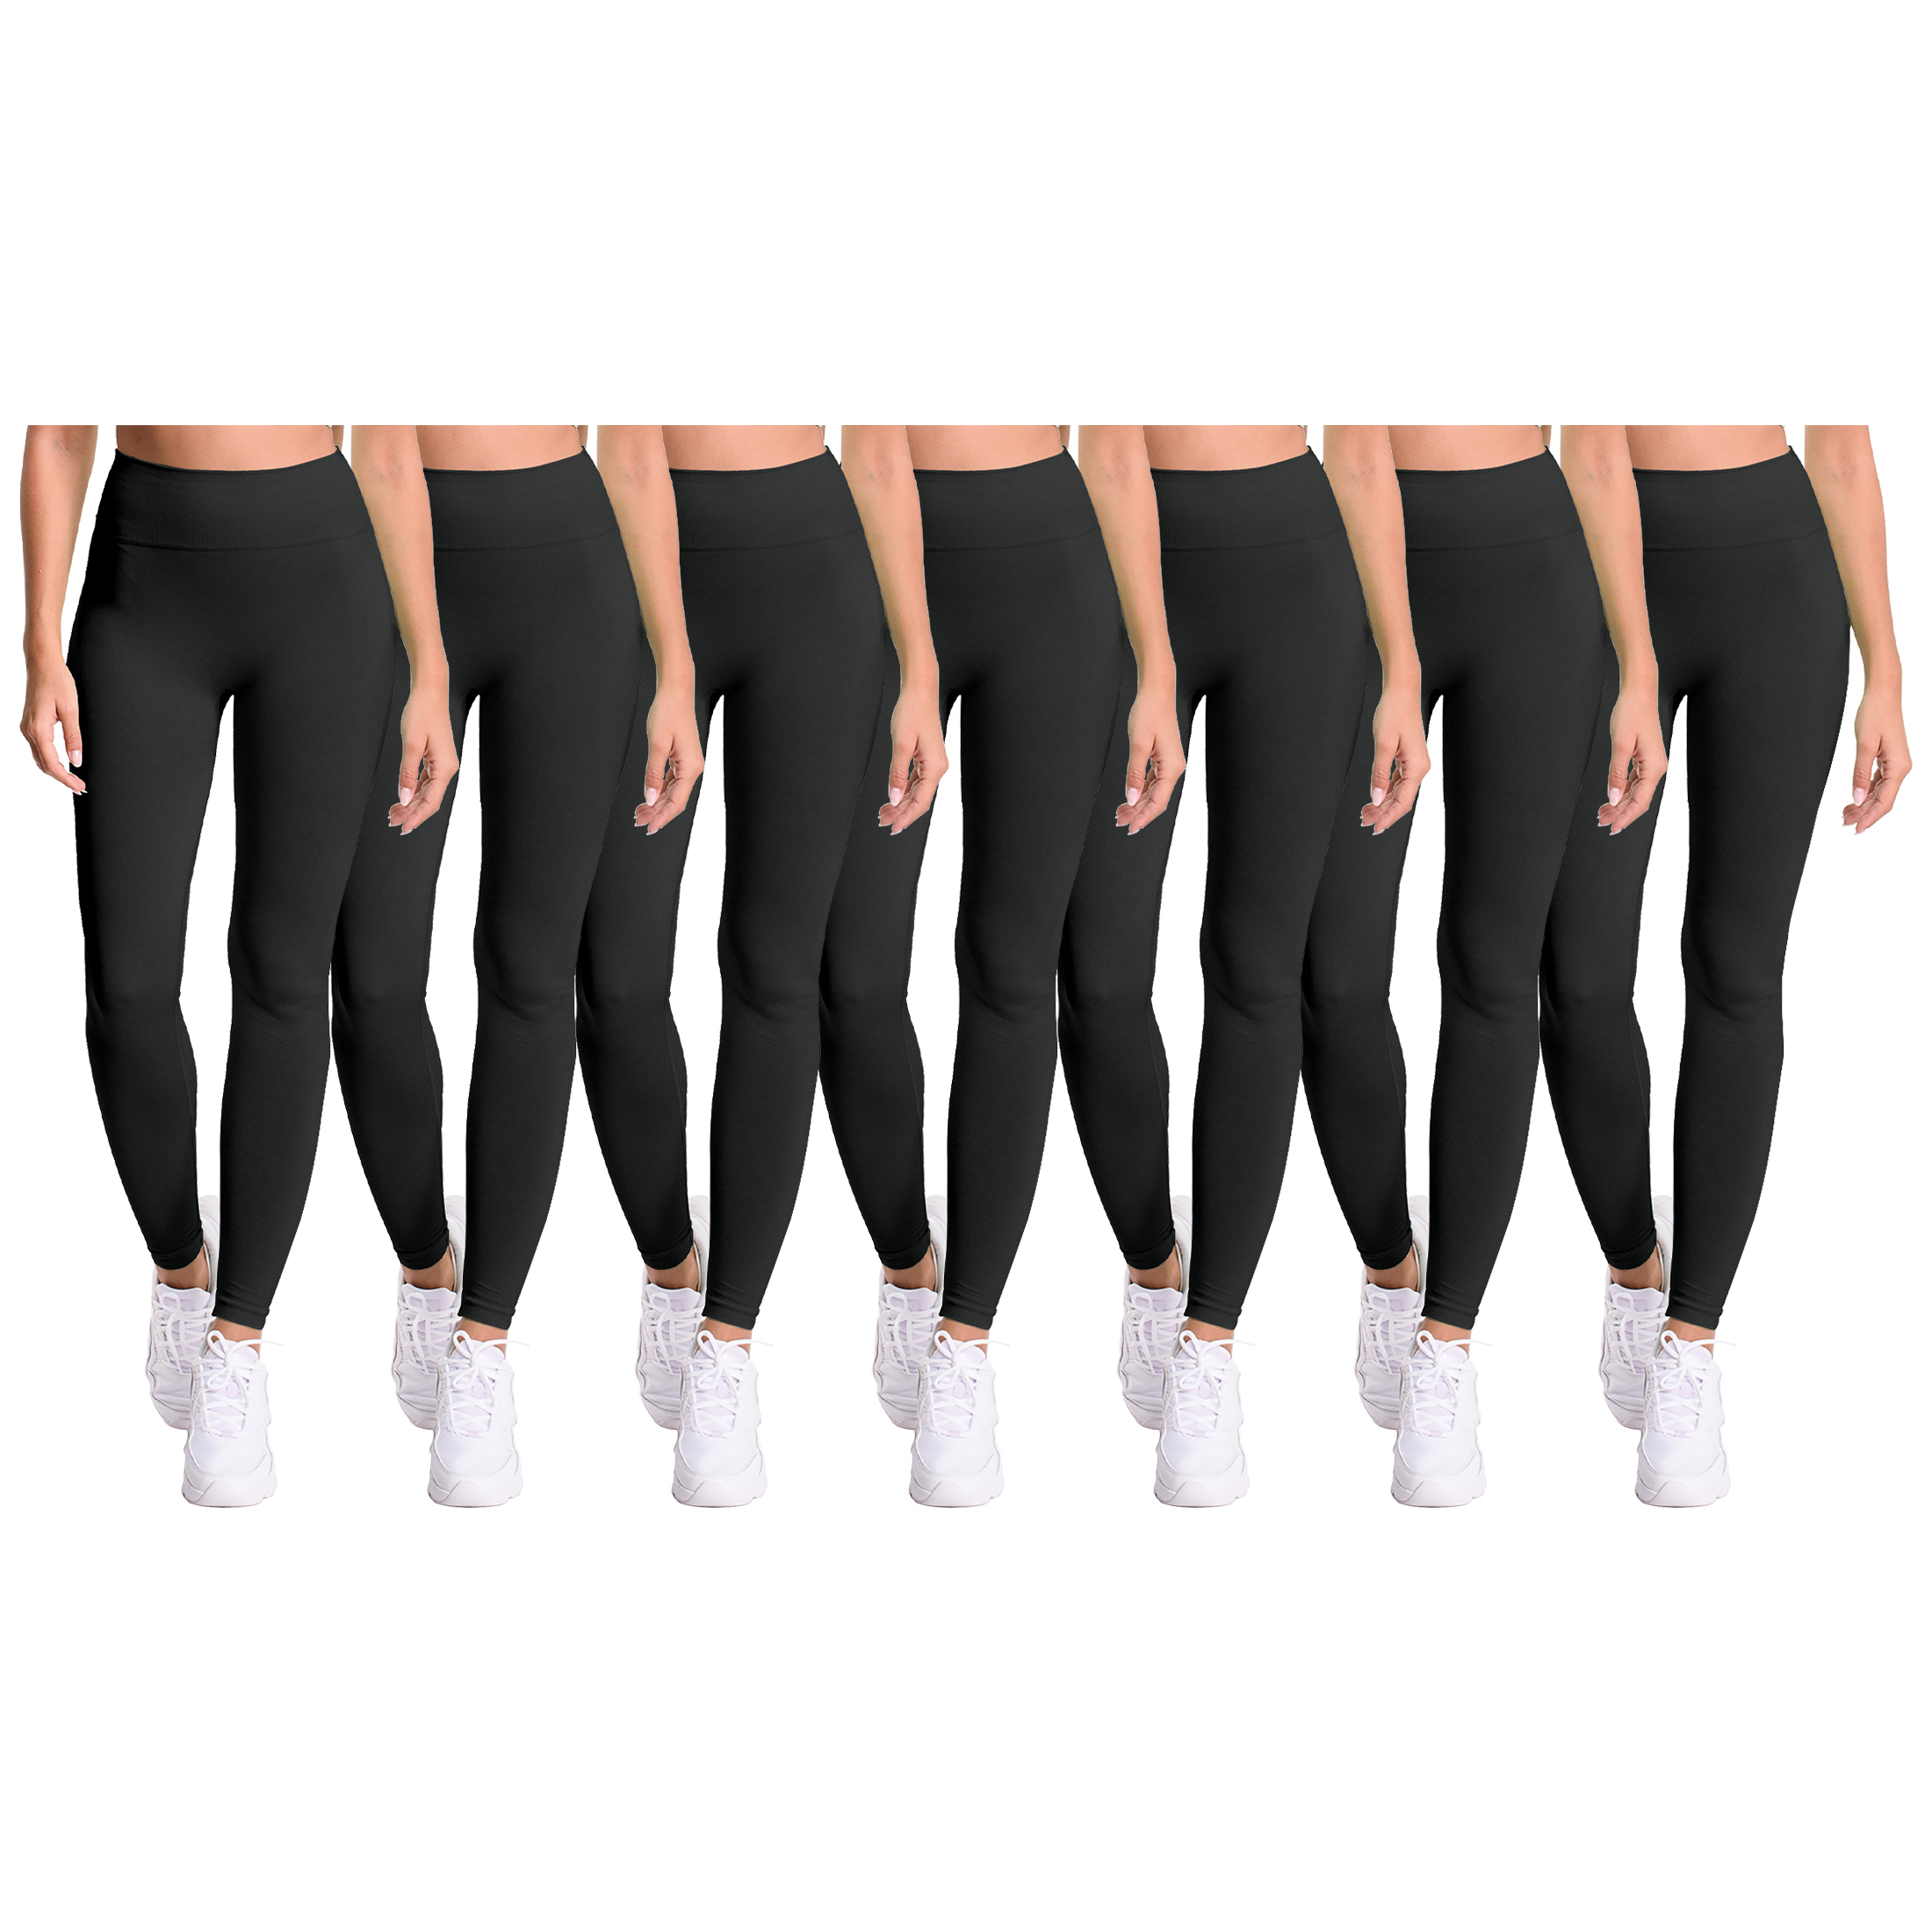 6-Pack: Women's Cozy Fleece-Lined Workout Yoga Pants Seamless Leggings - Assorted, Large